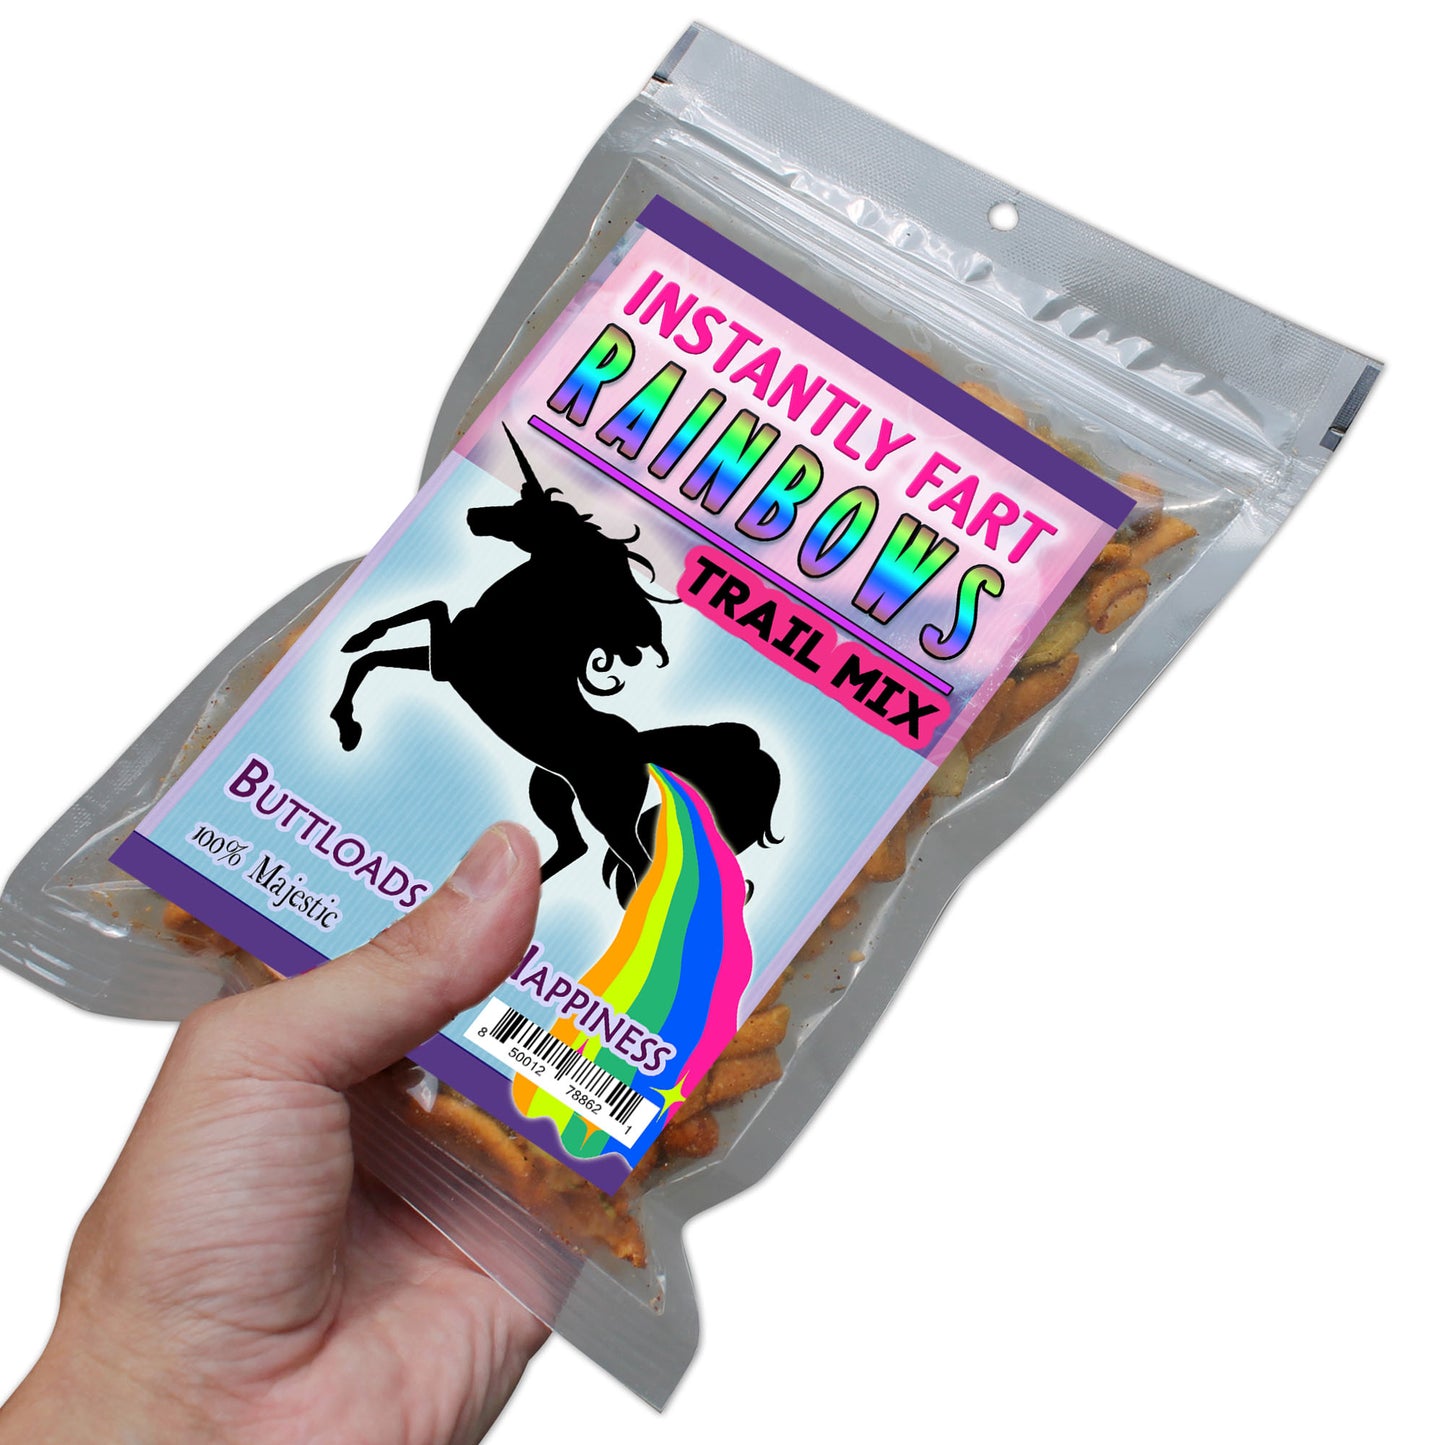 Instantly Fart Rainbows Trail Mix